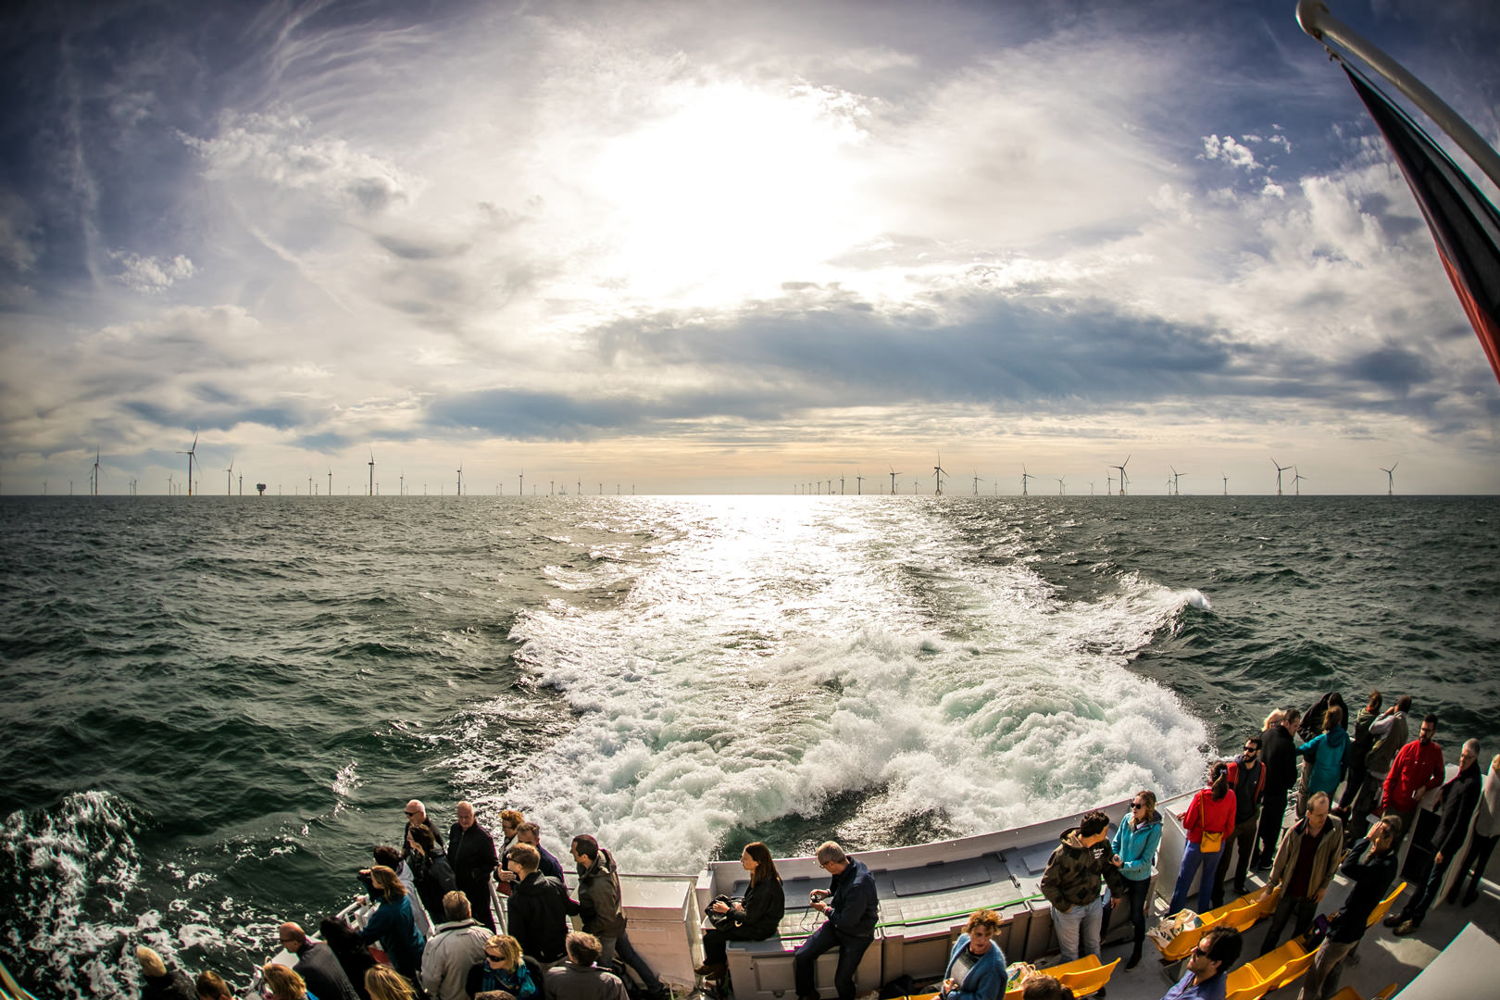 1 GOLD BEA World Award for Offshore Wind Energy Experience